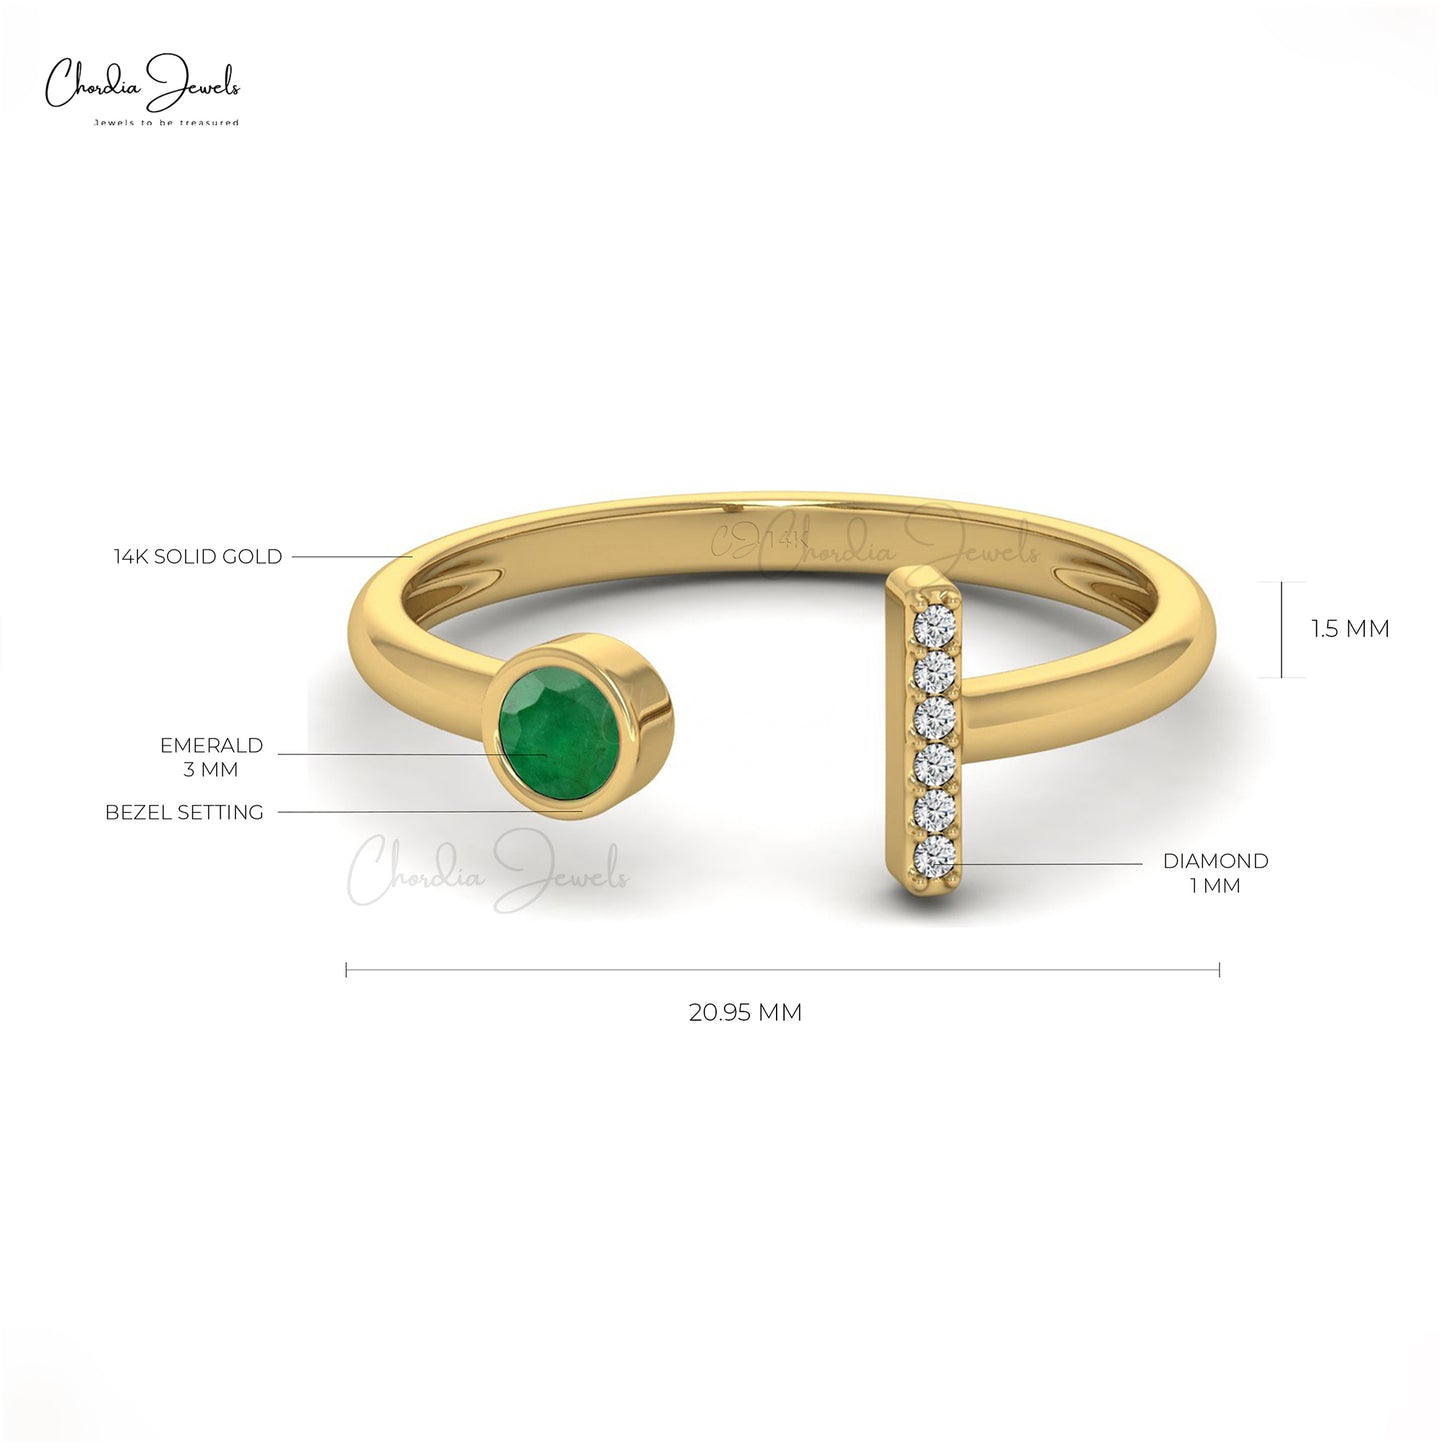 Natural Emerald 3mm Round Cut Gemstone Split Shank Ring 14k Solid Gold Diamond  Ring For Engagement